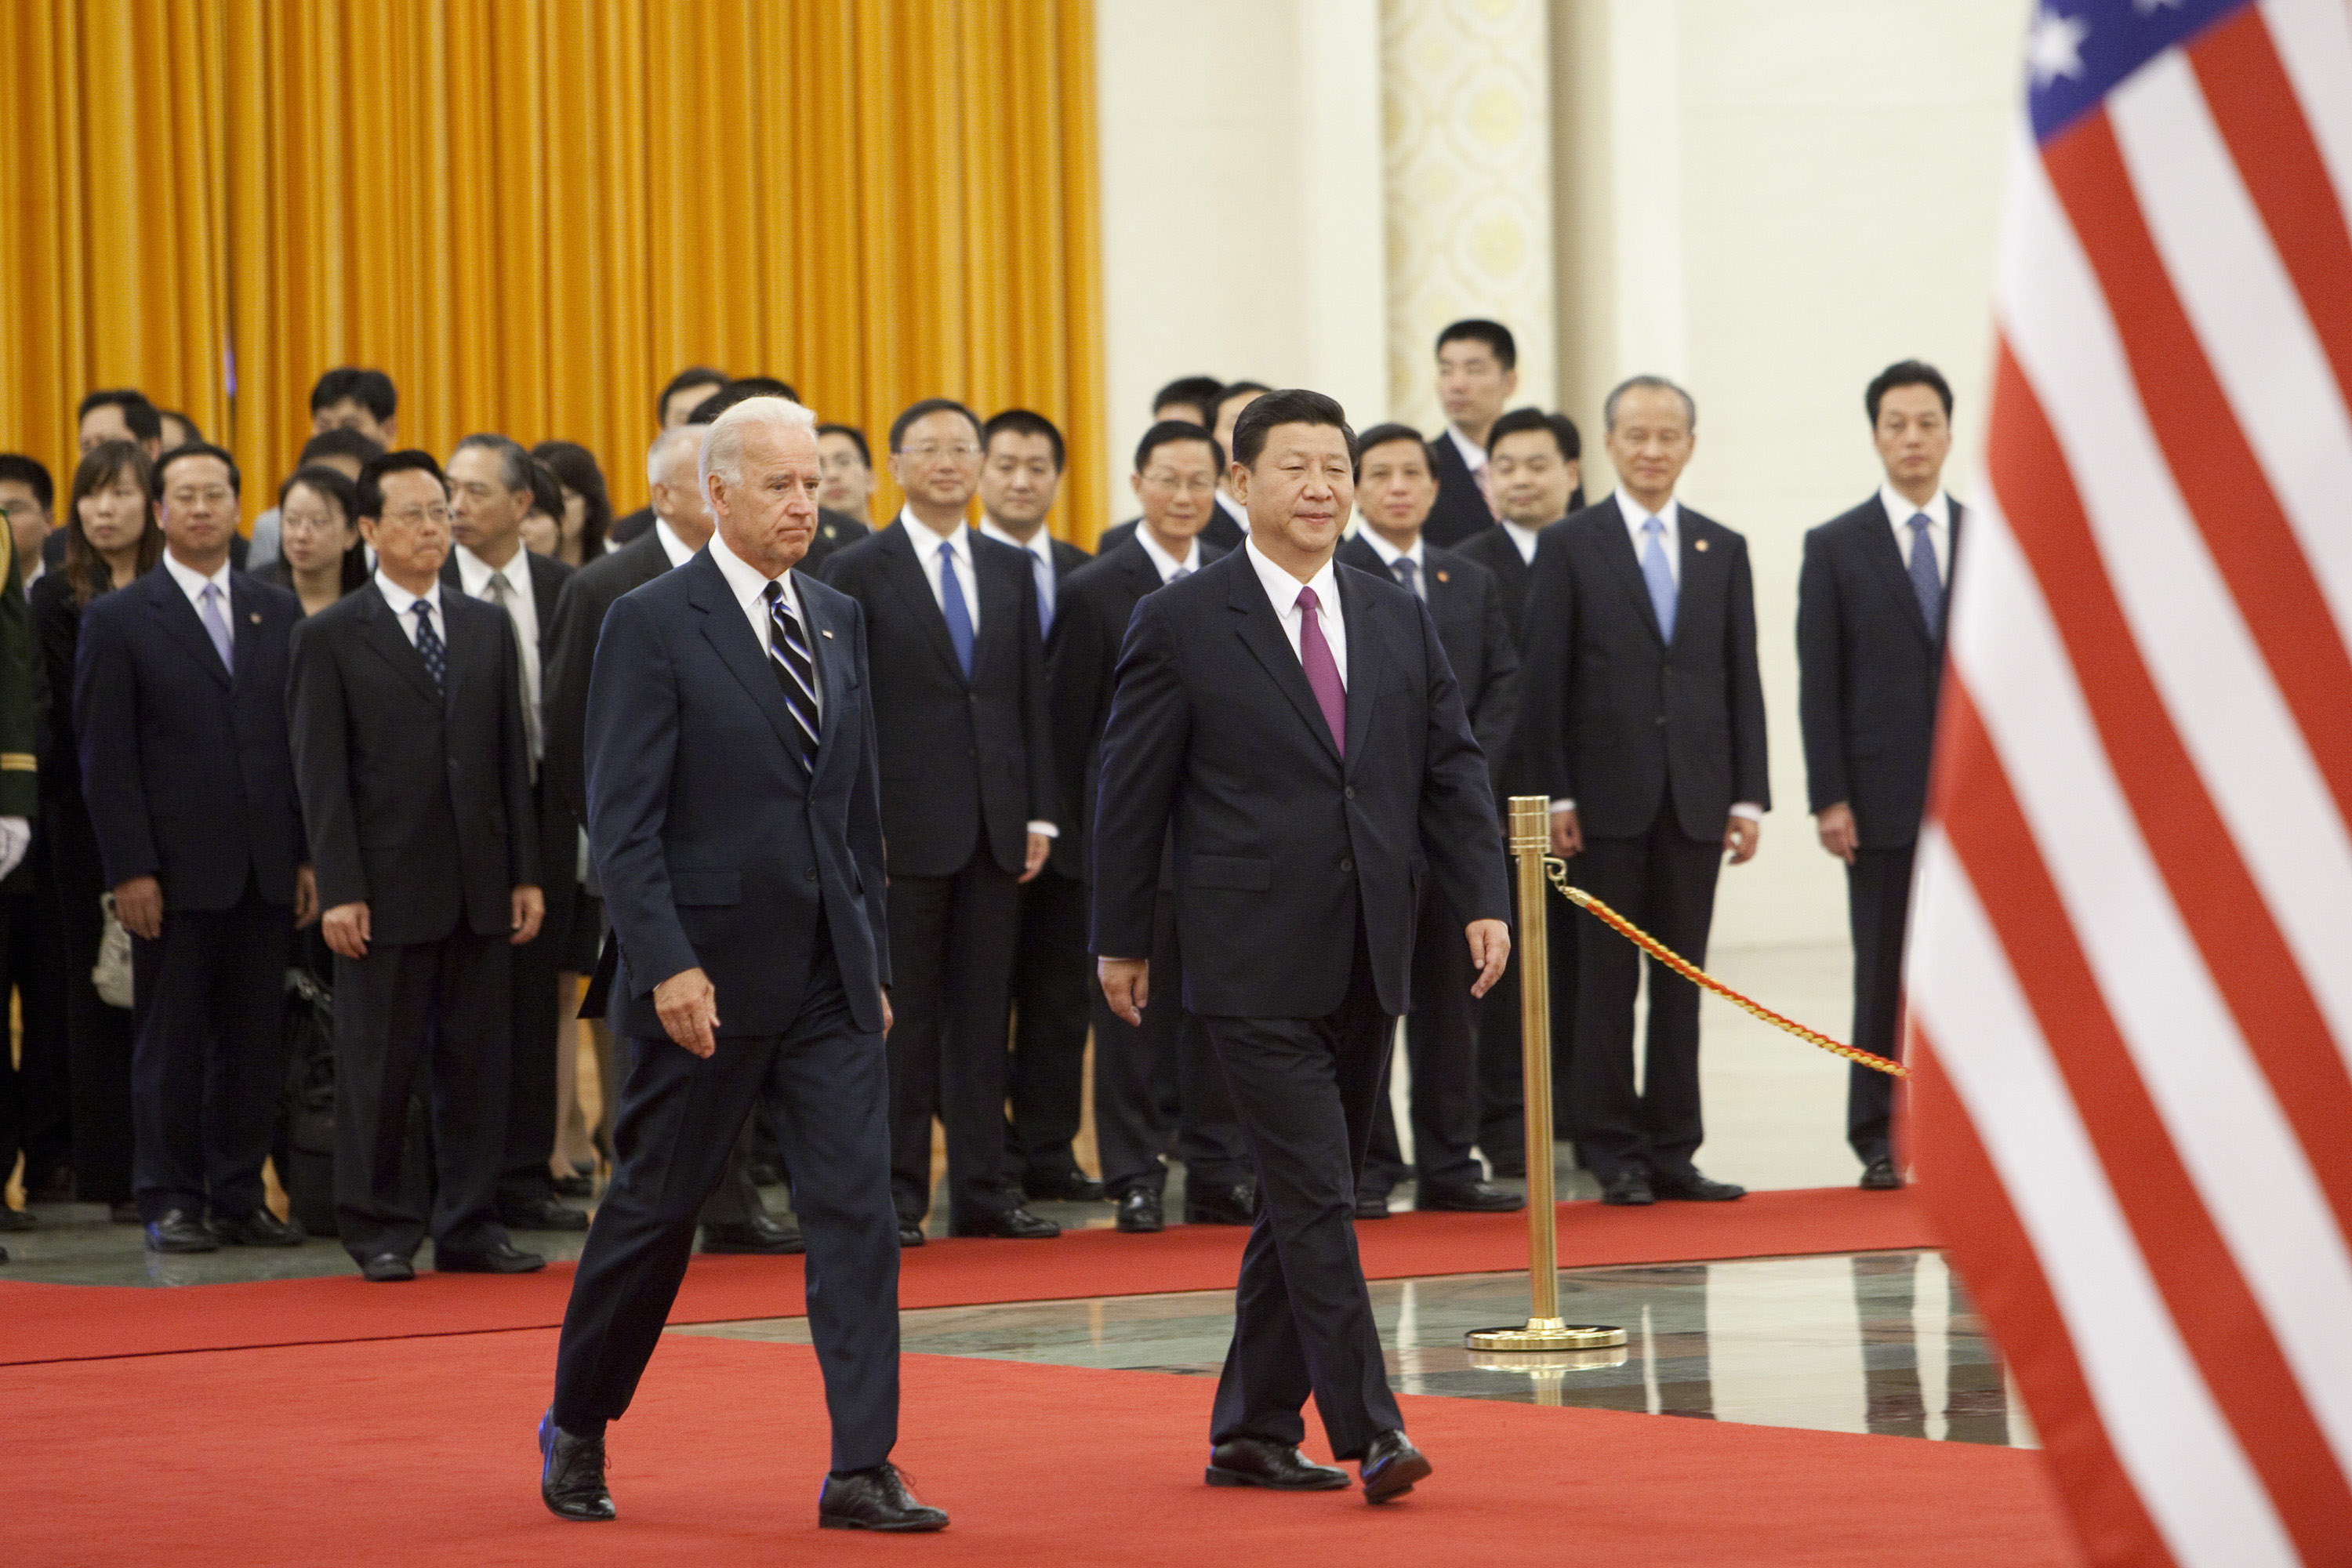 Joe Biden and Xi Jinping at the Great Hall of the People in Beijing, China, August 18, 2011. 